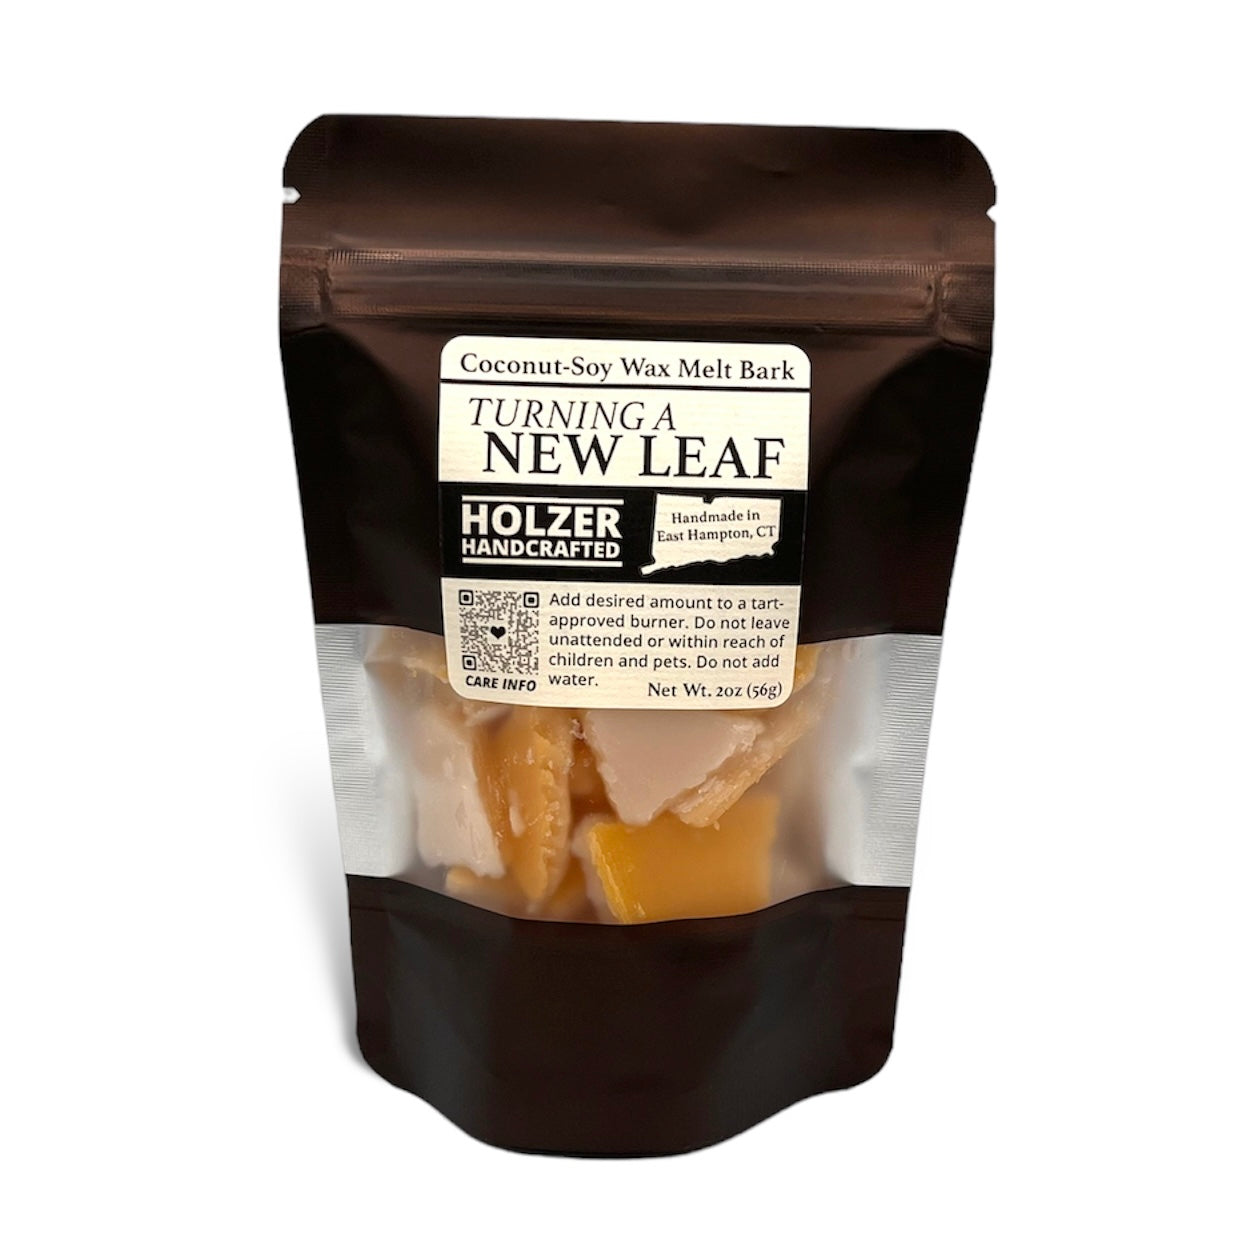 Turning a New Leaf, Scented Wax Melt Bark in Resealable Pouch